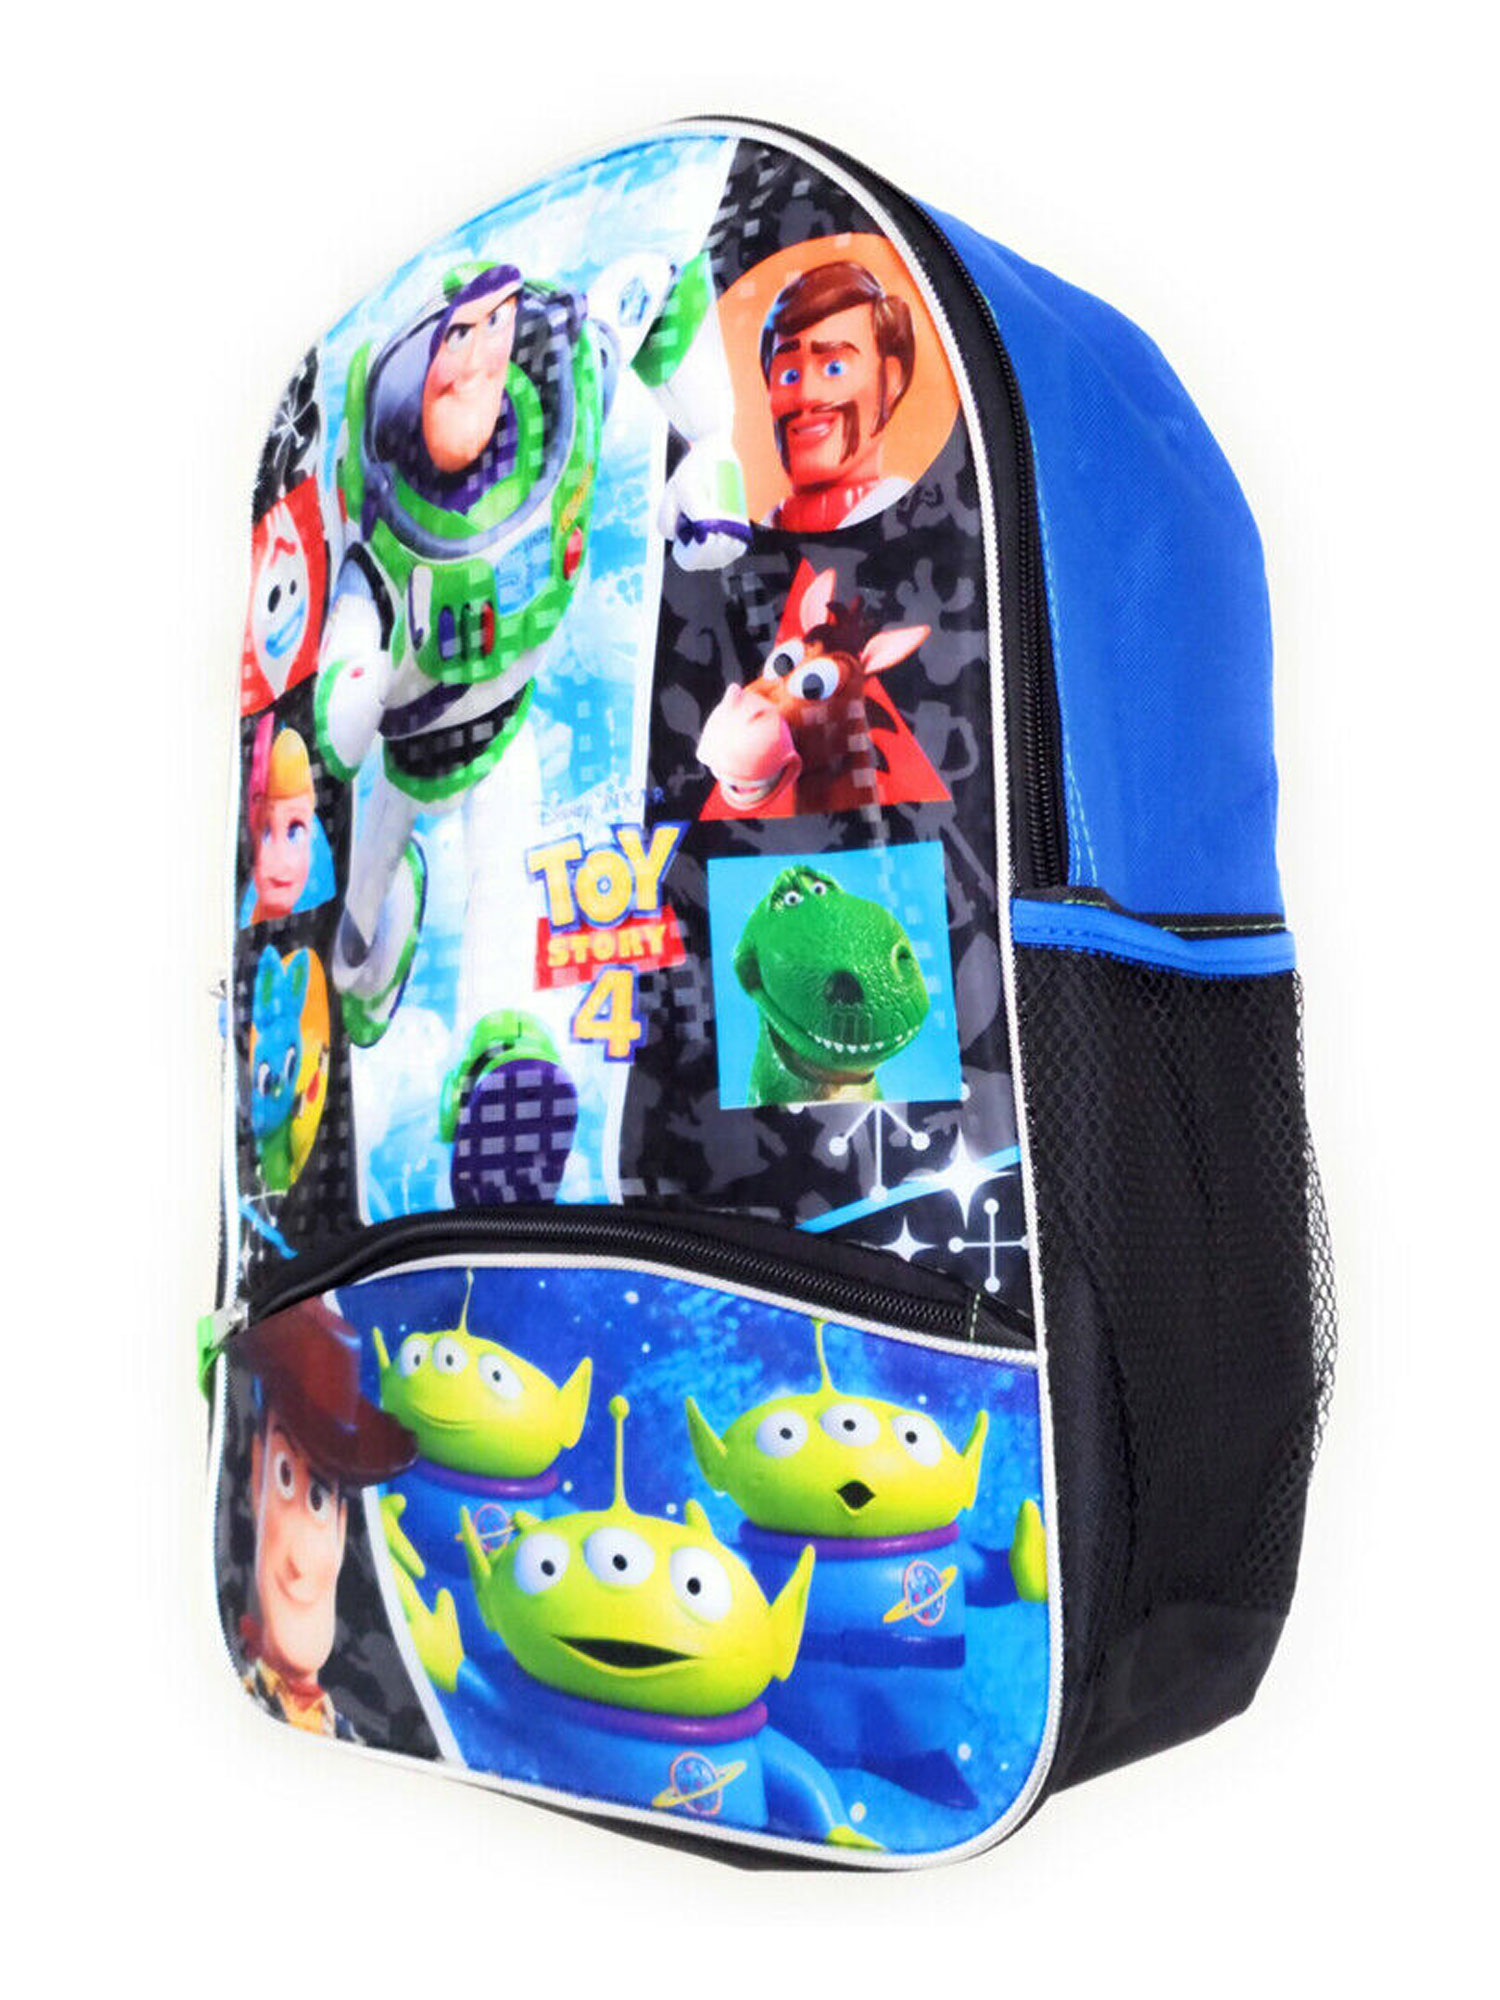 Boys Disney Pixar Toy Story 4 Backpack Woody Buzz Ducky Bunny Forky and More! - image 2 of 4